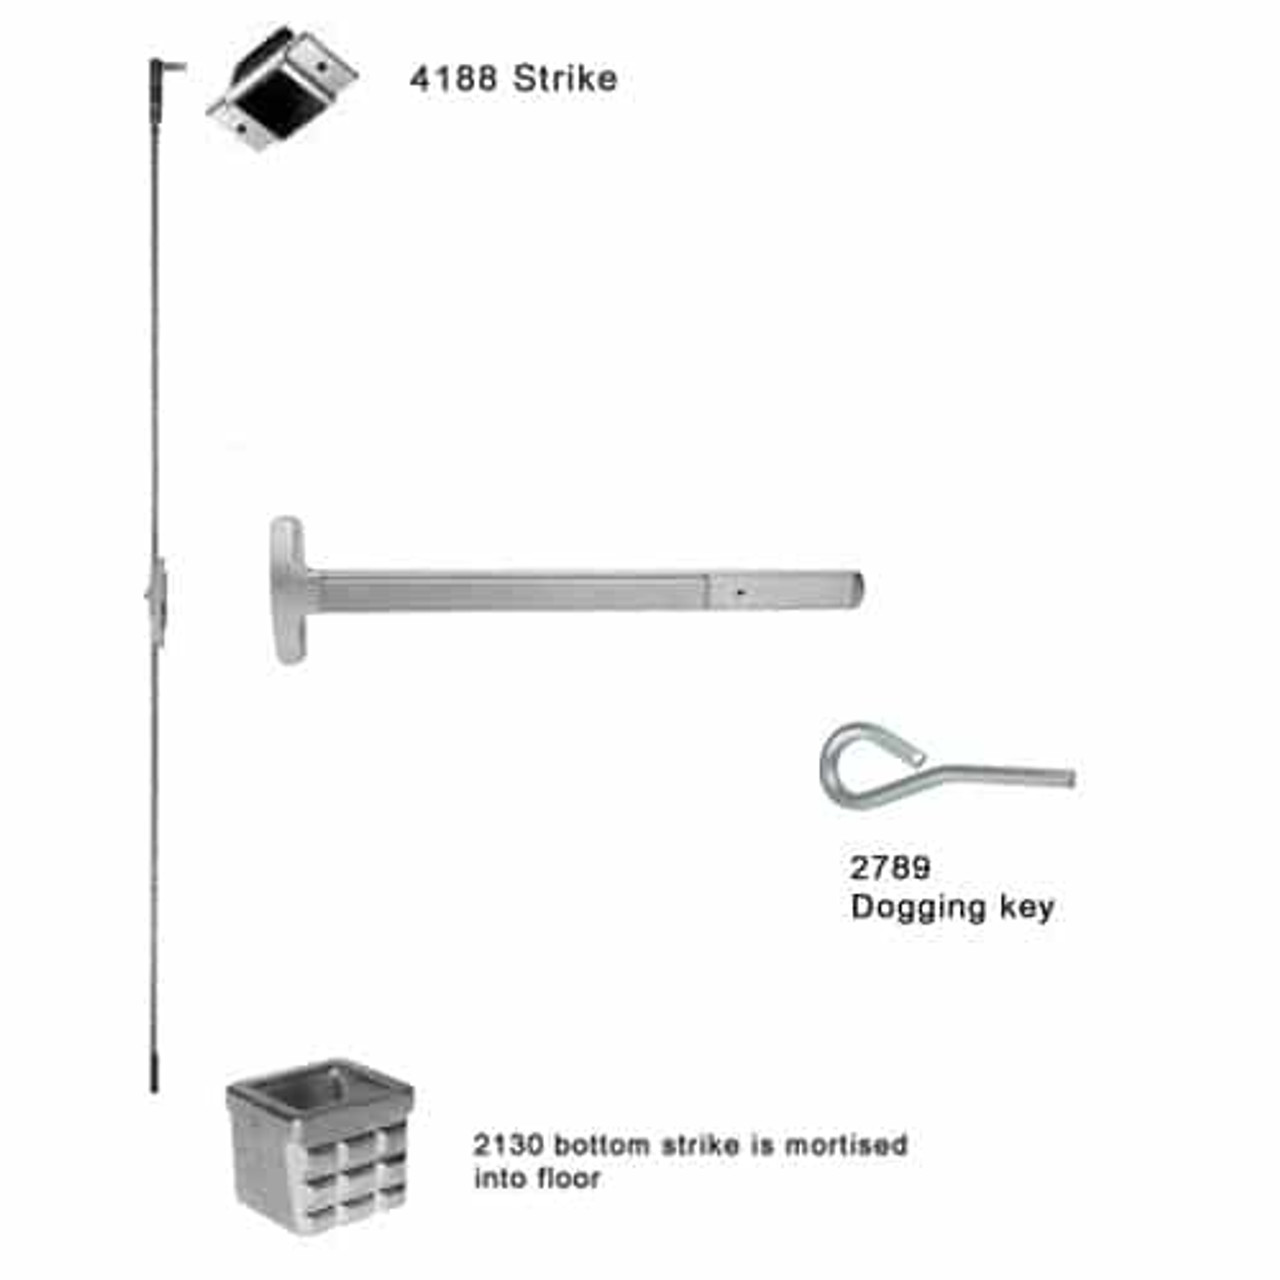 24-C-NL-US32-4-RHR Falcon 24 Series Concealed Vertical Rod Device with 718NL Delta Night Latch Trim in Polished Stainless Steel